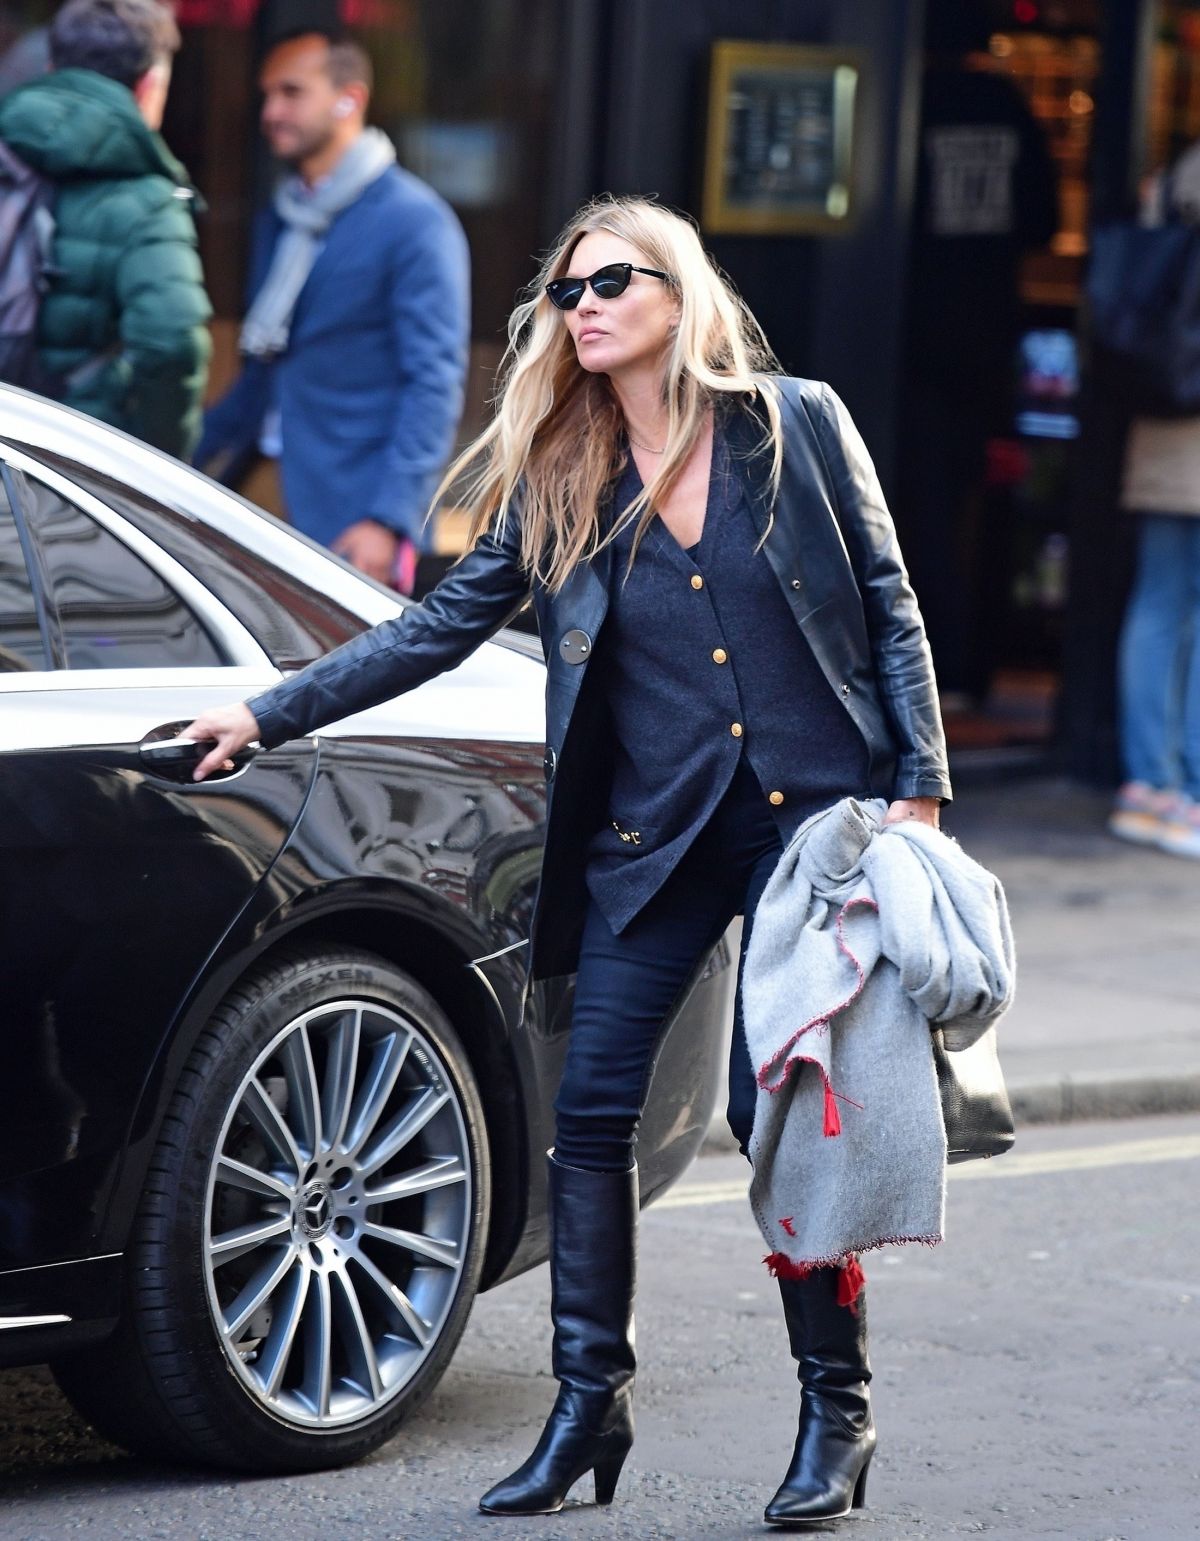 KATE MOSS Leaves a Hairdresser in London 10/01/2020 – HawtCelebs